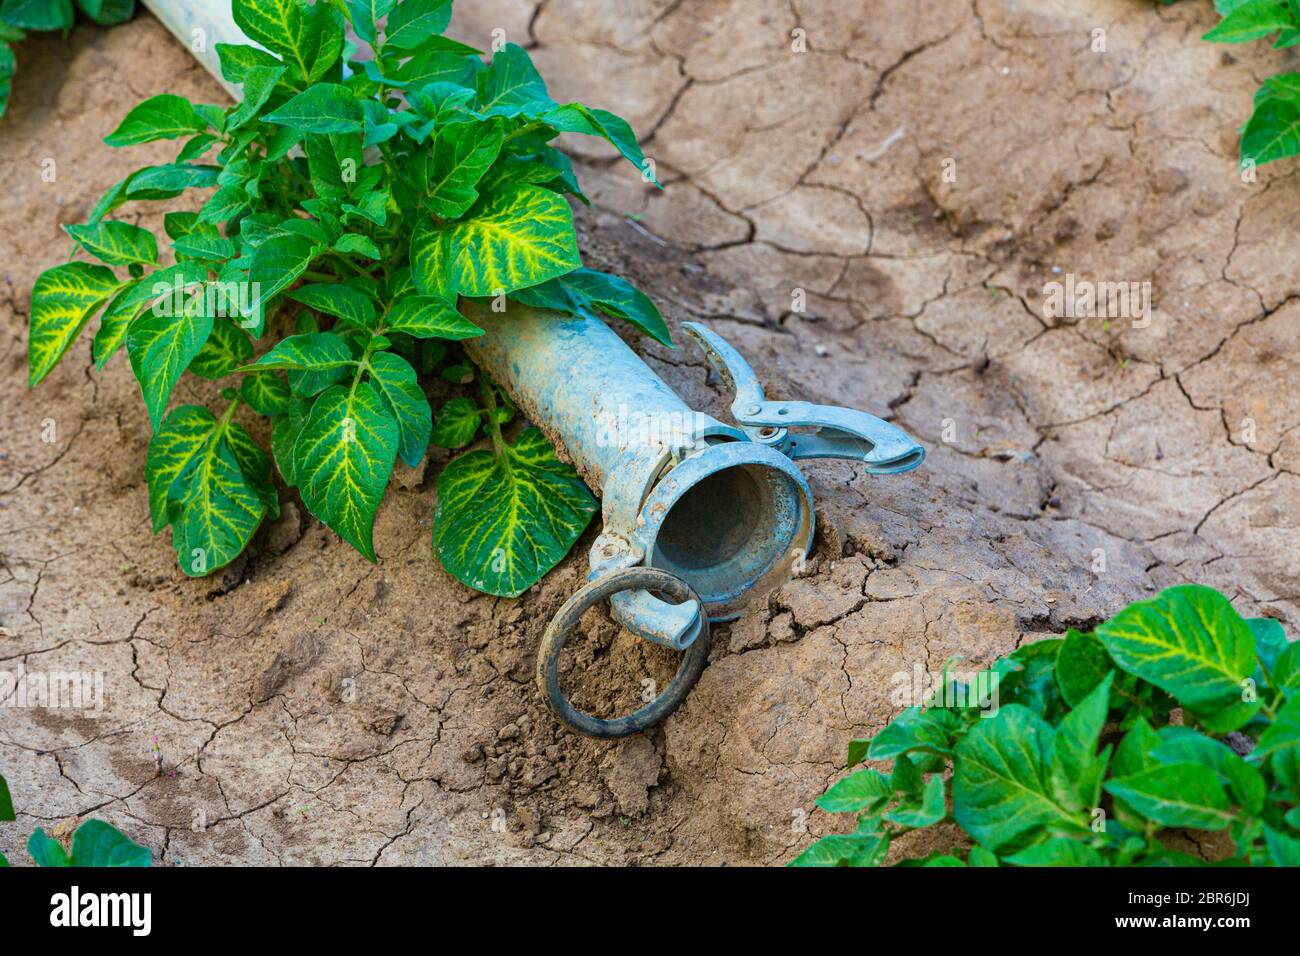 detail of a young green potato plant and watering pipe outdoors Stock Photo